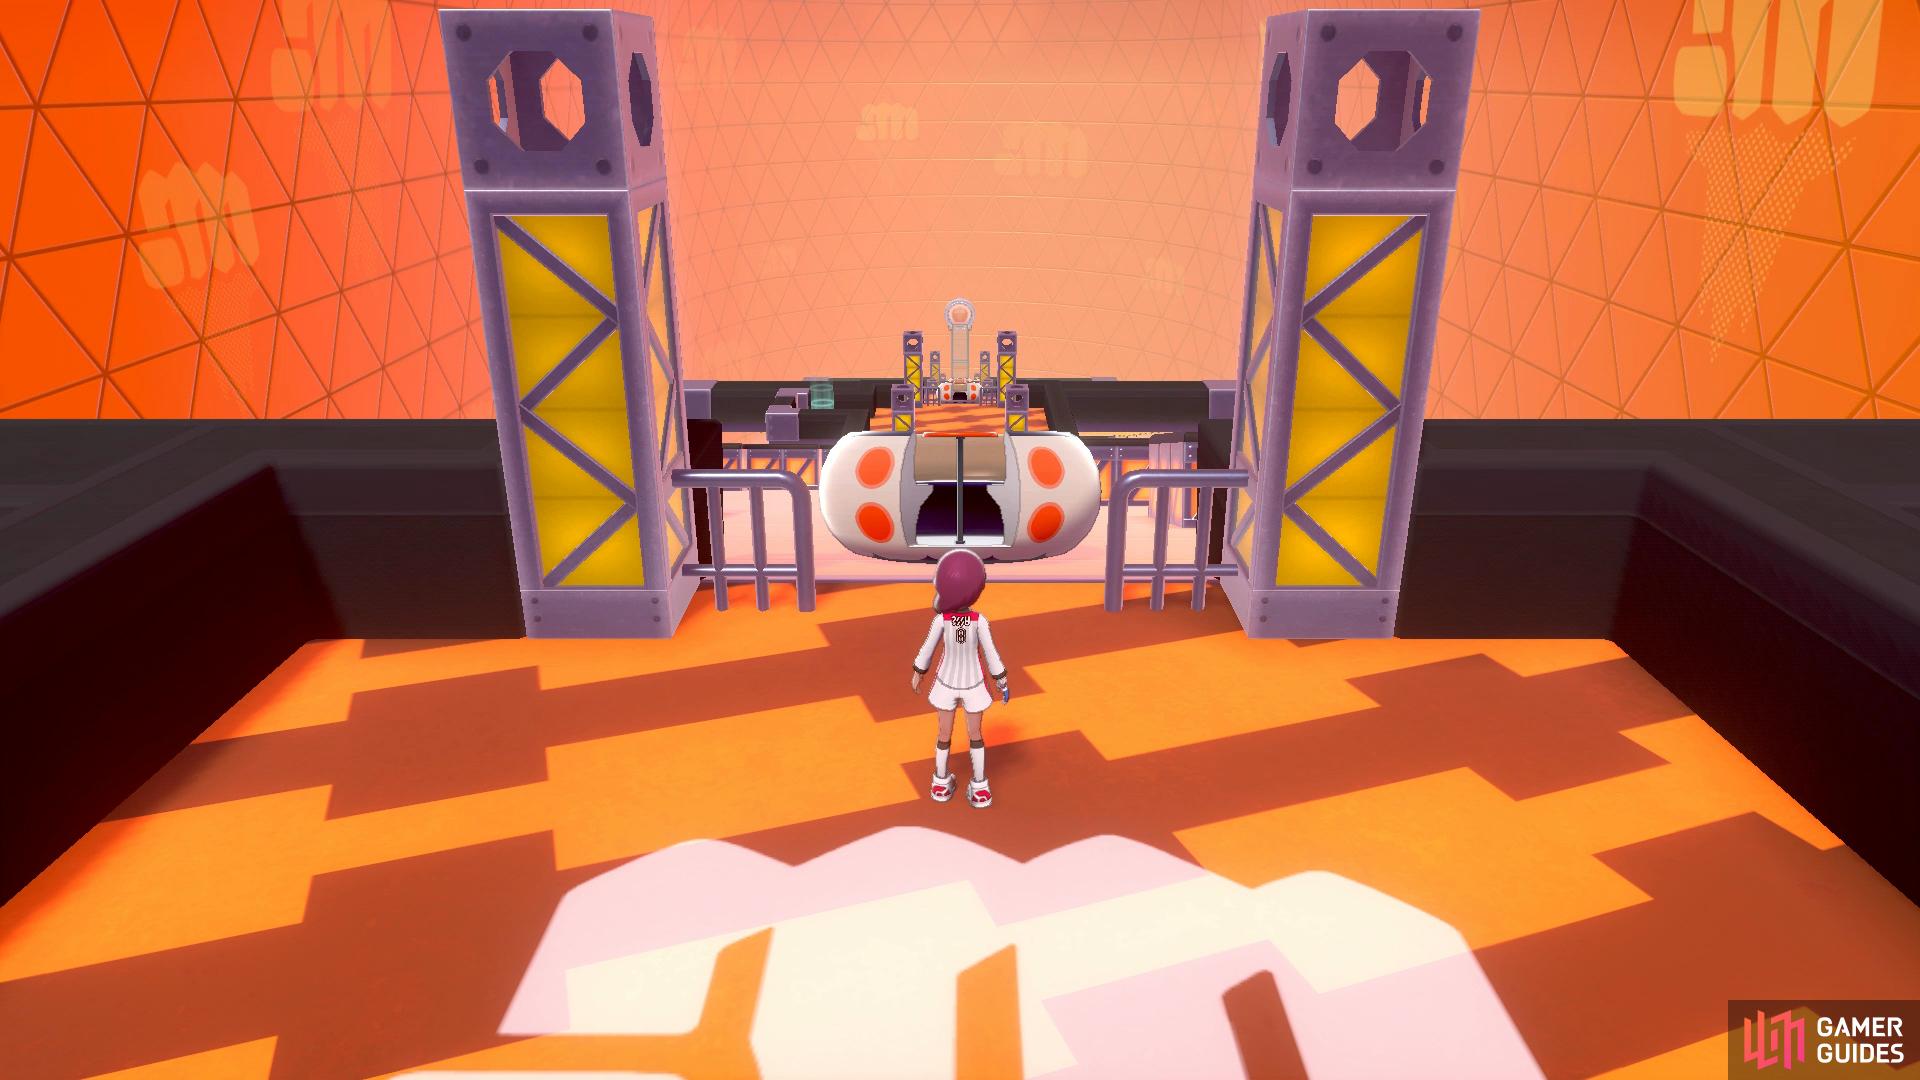 Pokemon Sword's Stow-on-Side gym: Guide to beating Bea - Polygon